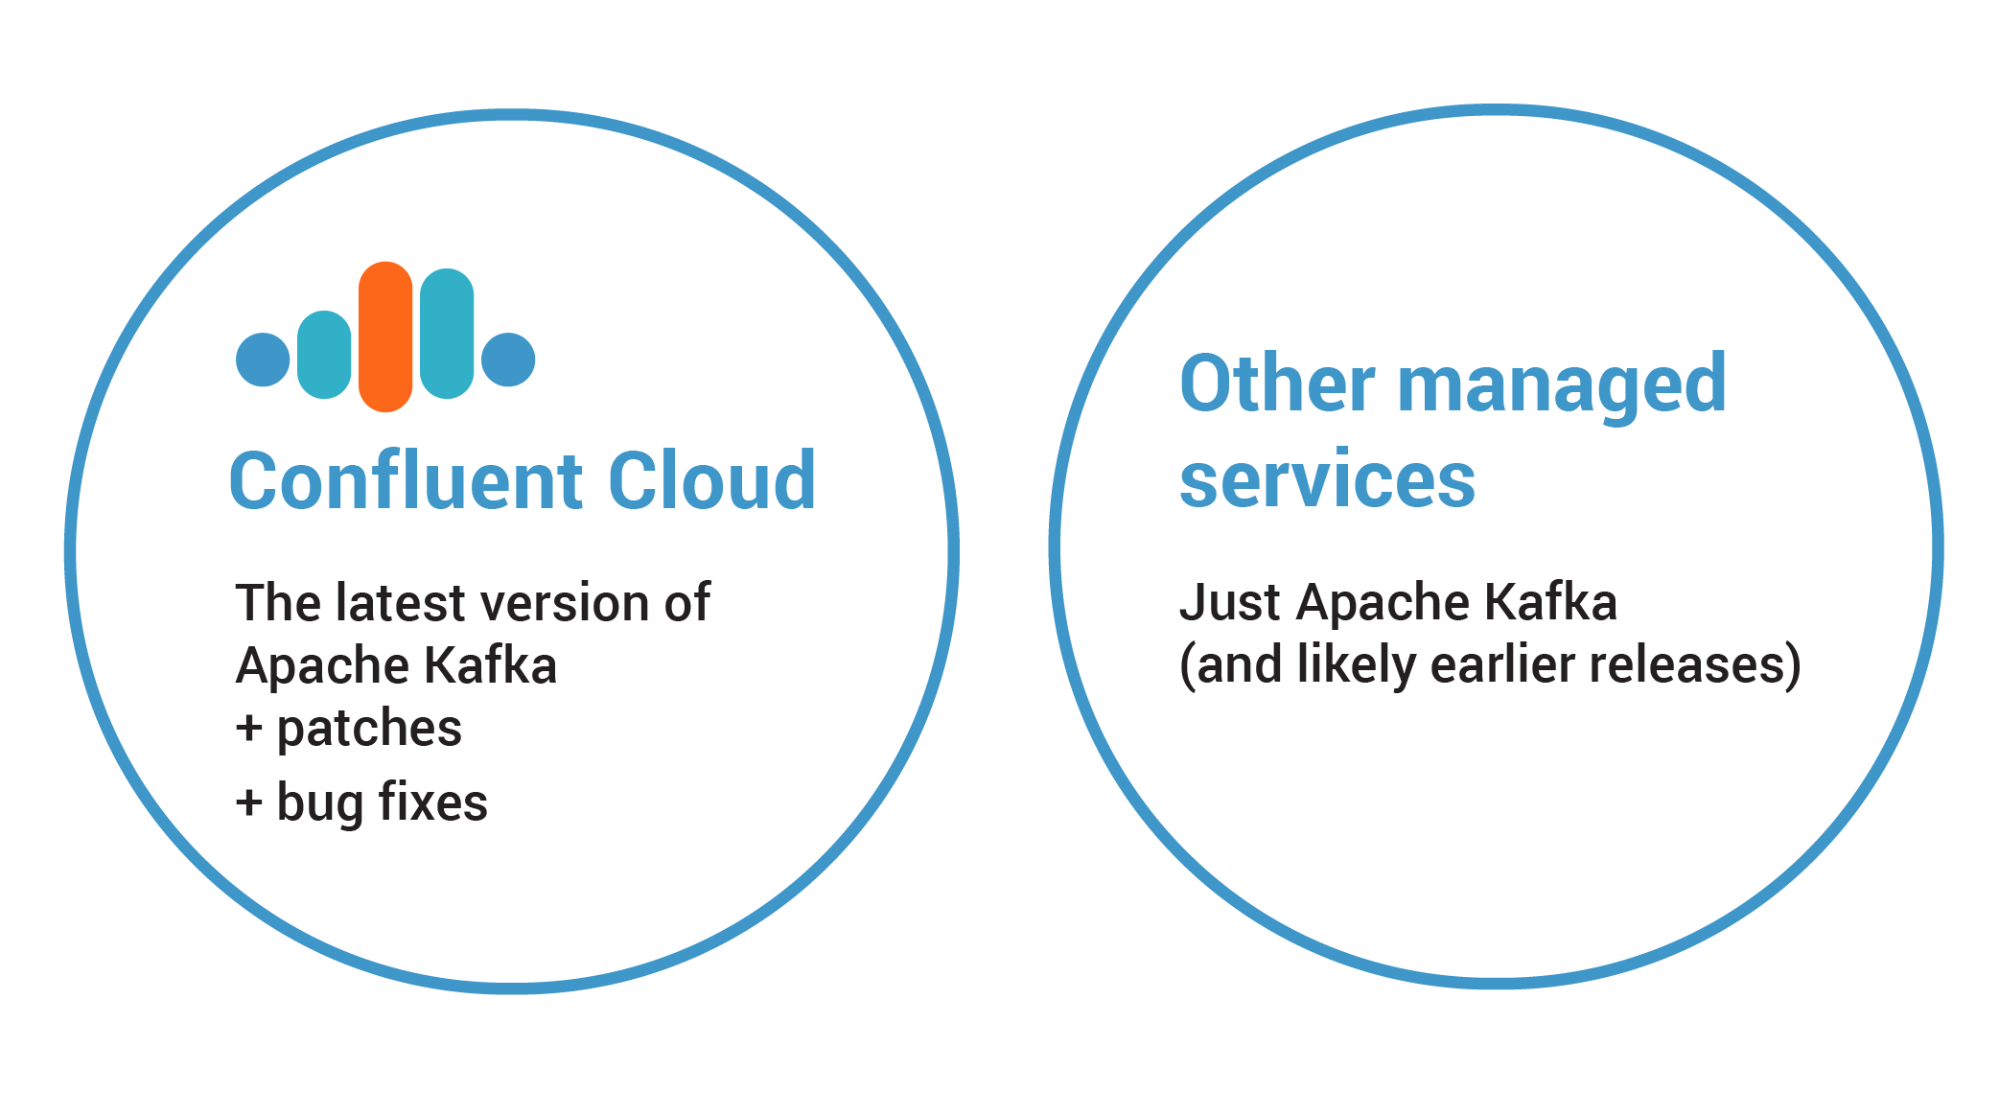 Confluent Cloud vs. Other Managed Services